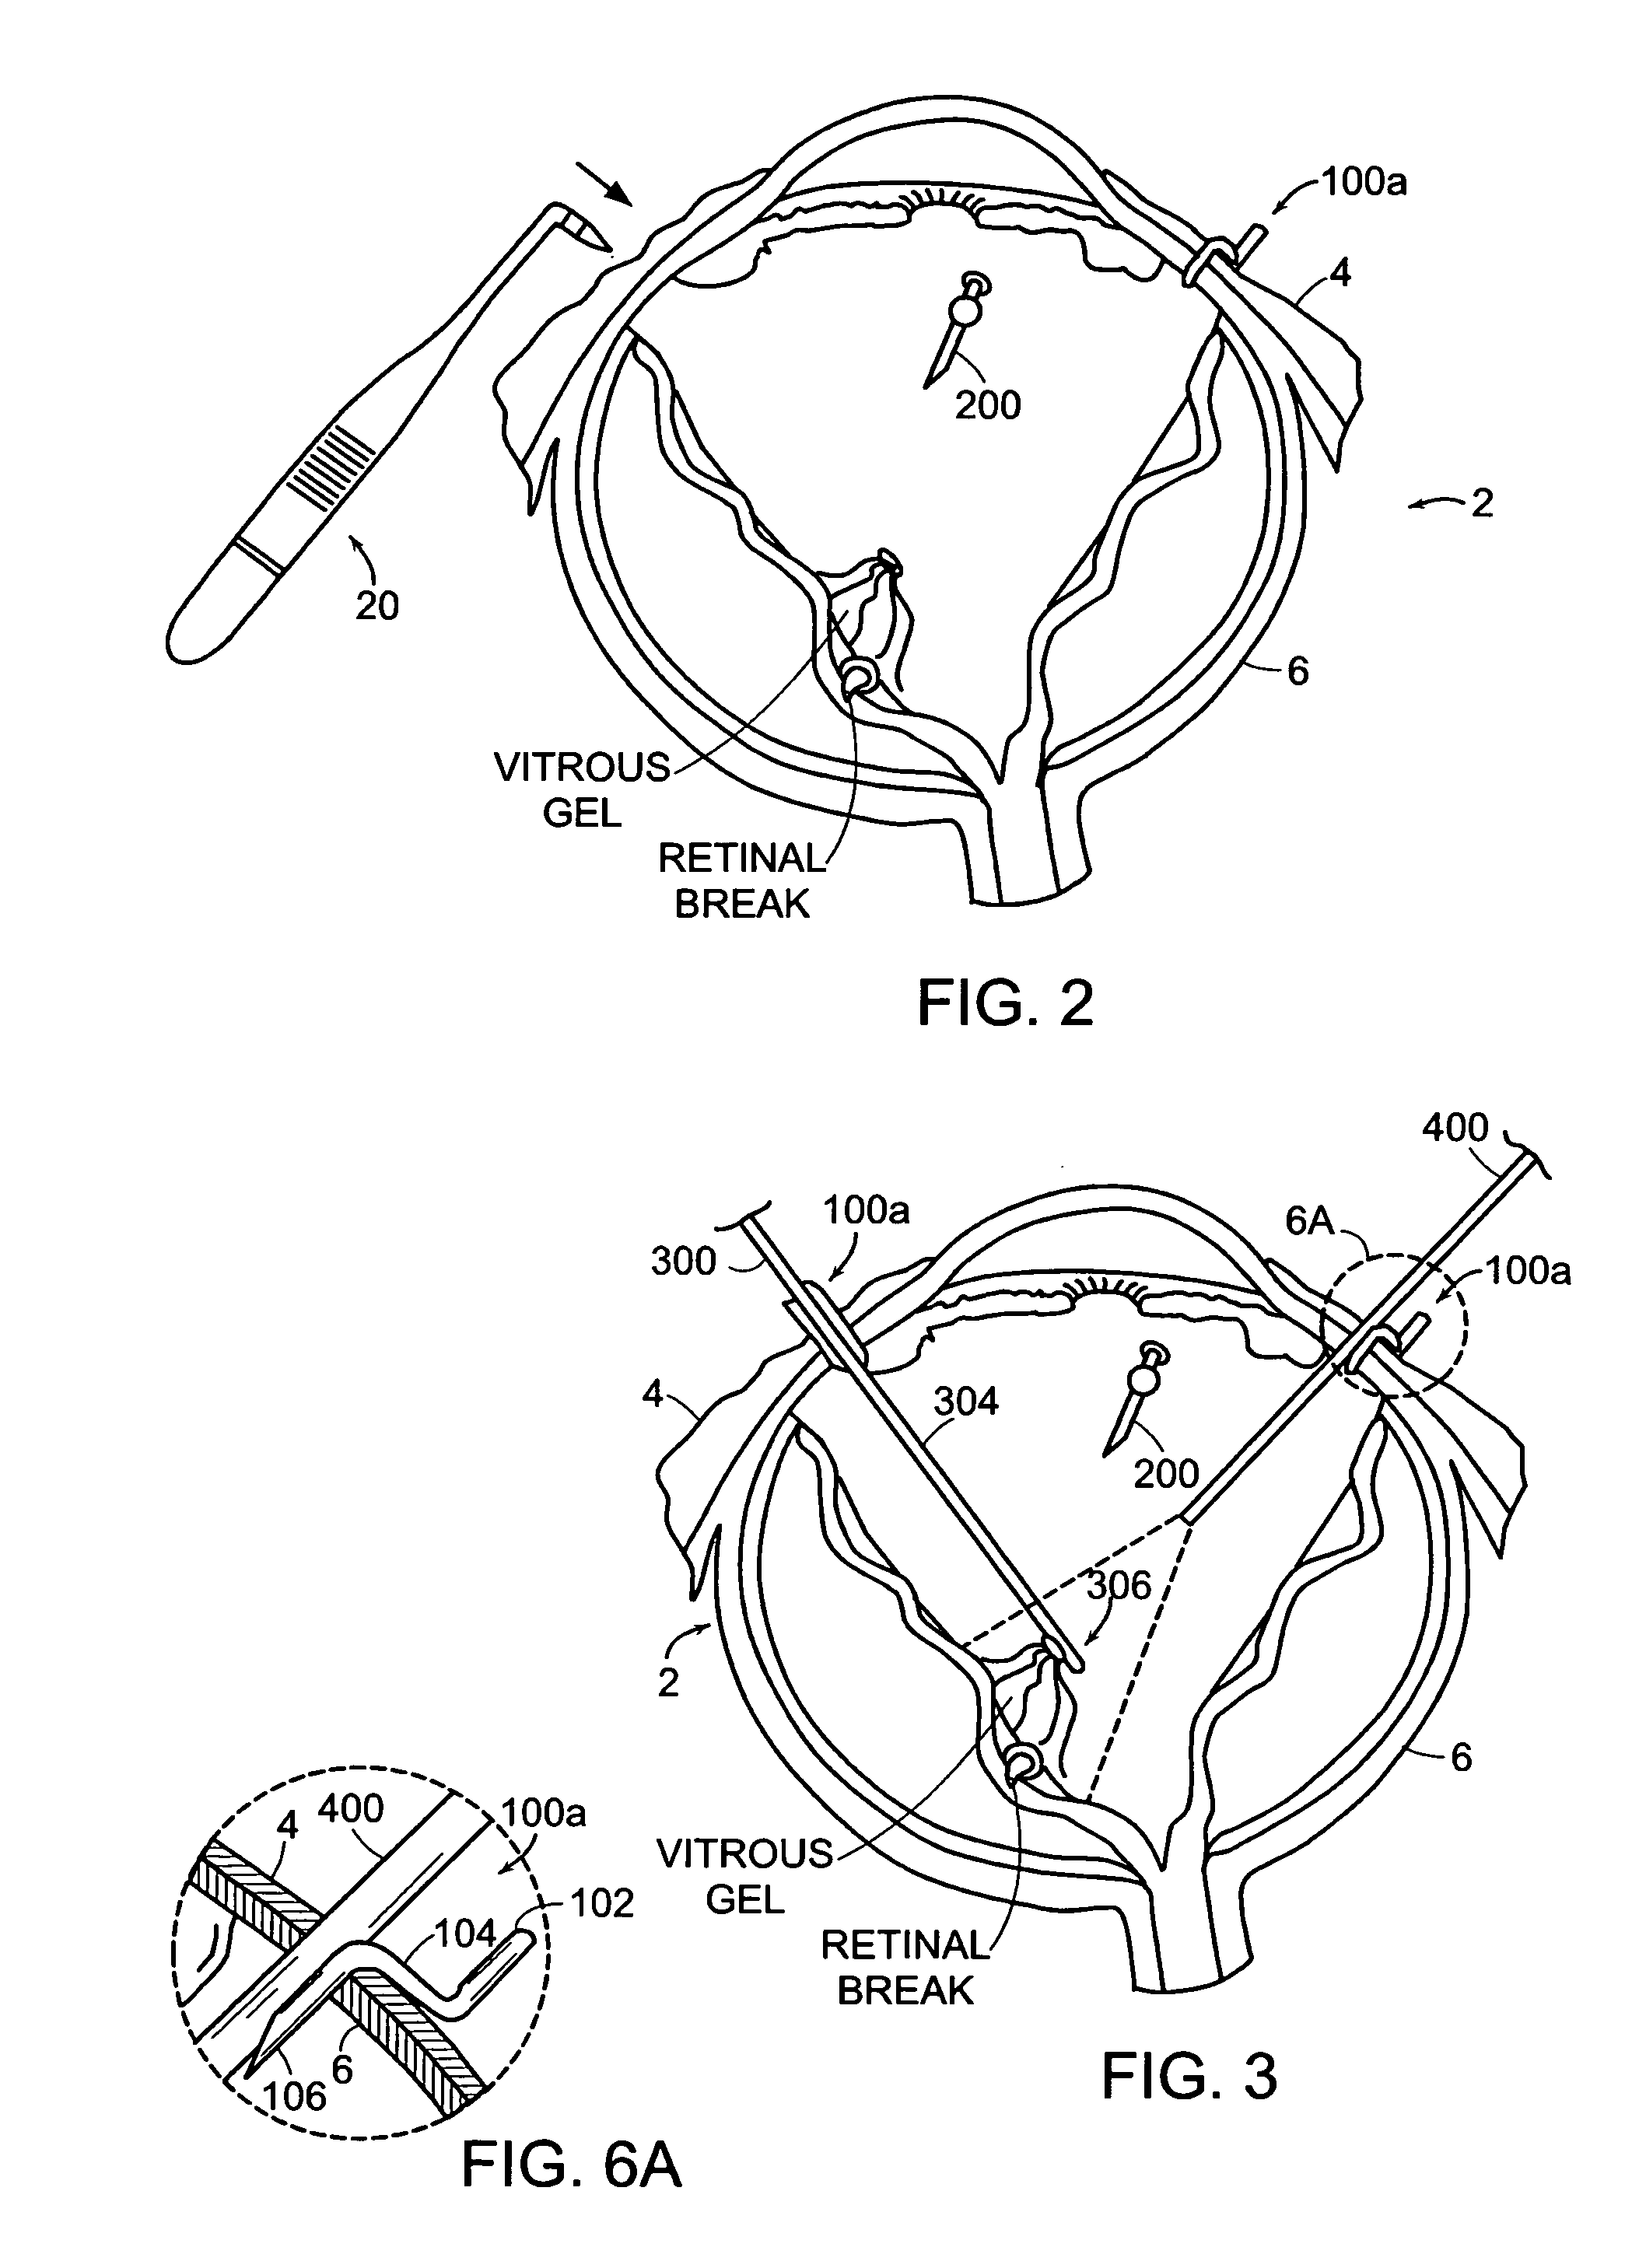 Sutureless occular surgical methods and instruments for use in such methods